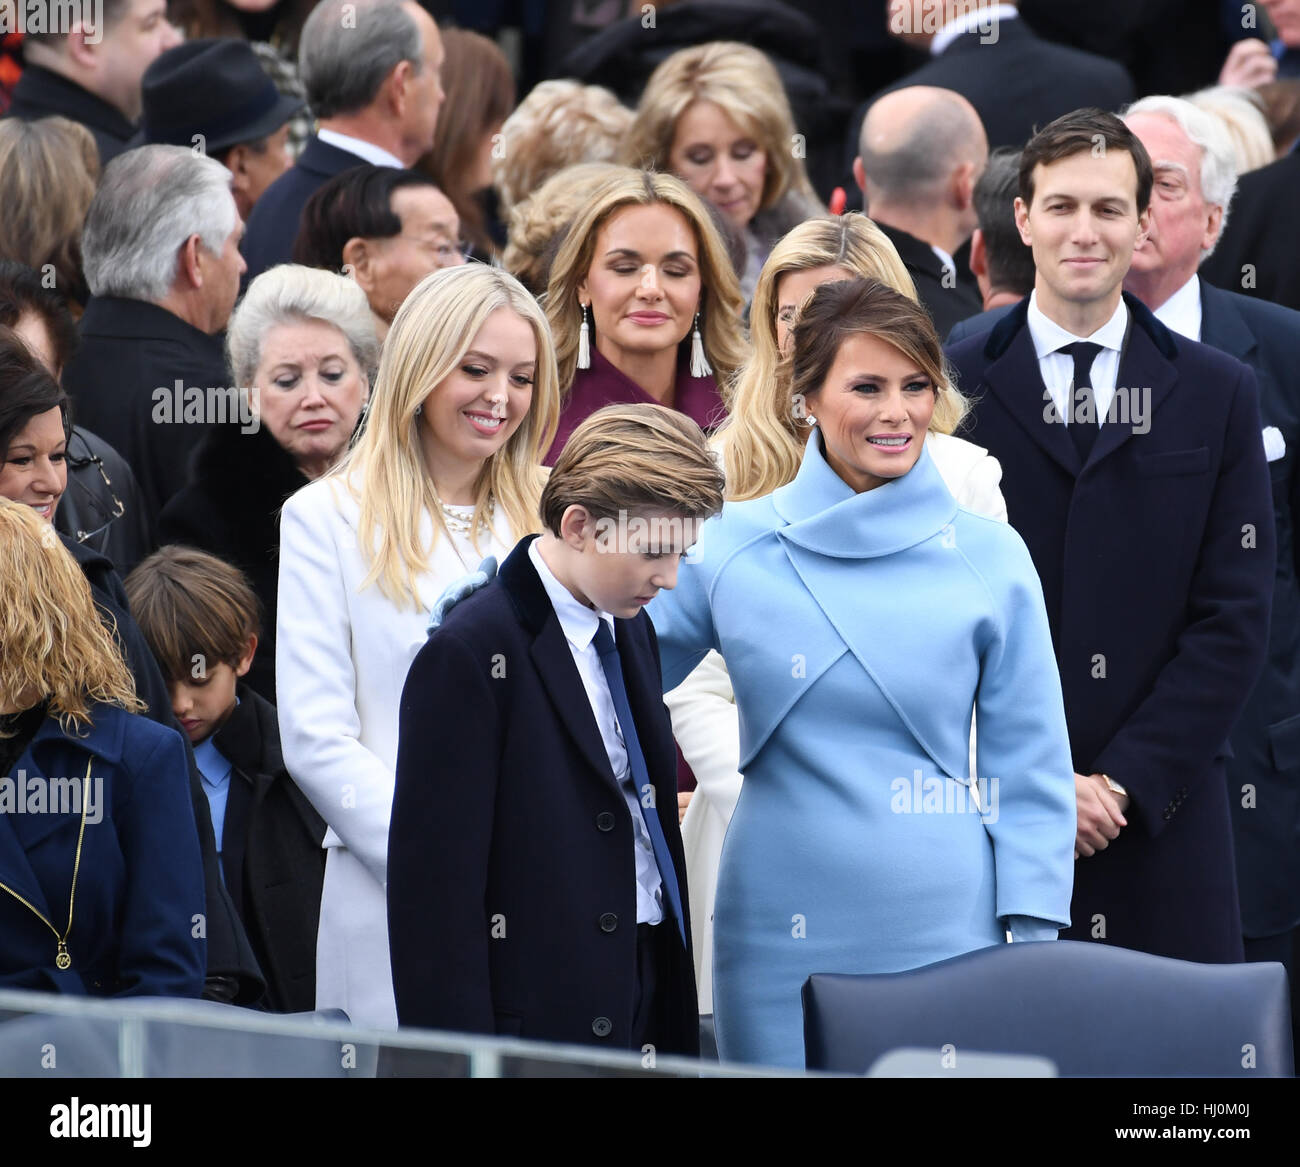 Melania Trump stands with Trump children at the inauguration of President  Donald Trump on January 20, 2017 in Washington, DC Trump becomes the 45th  President of the United States. Photo by Pat